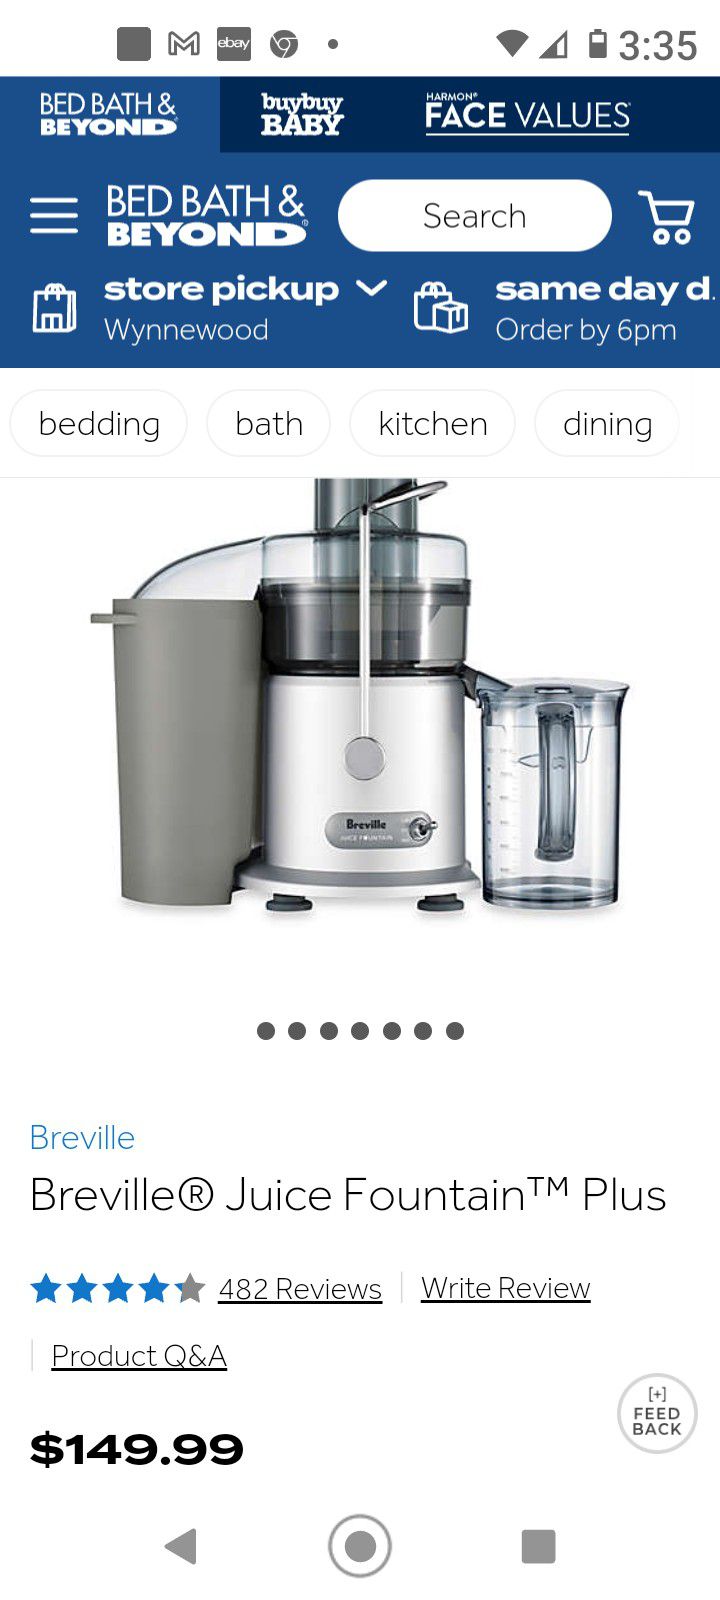 New Breville Fountain Juicer Plus